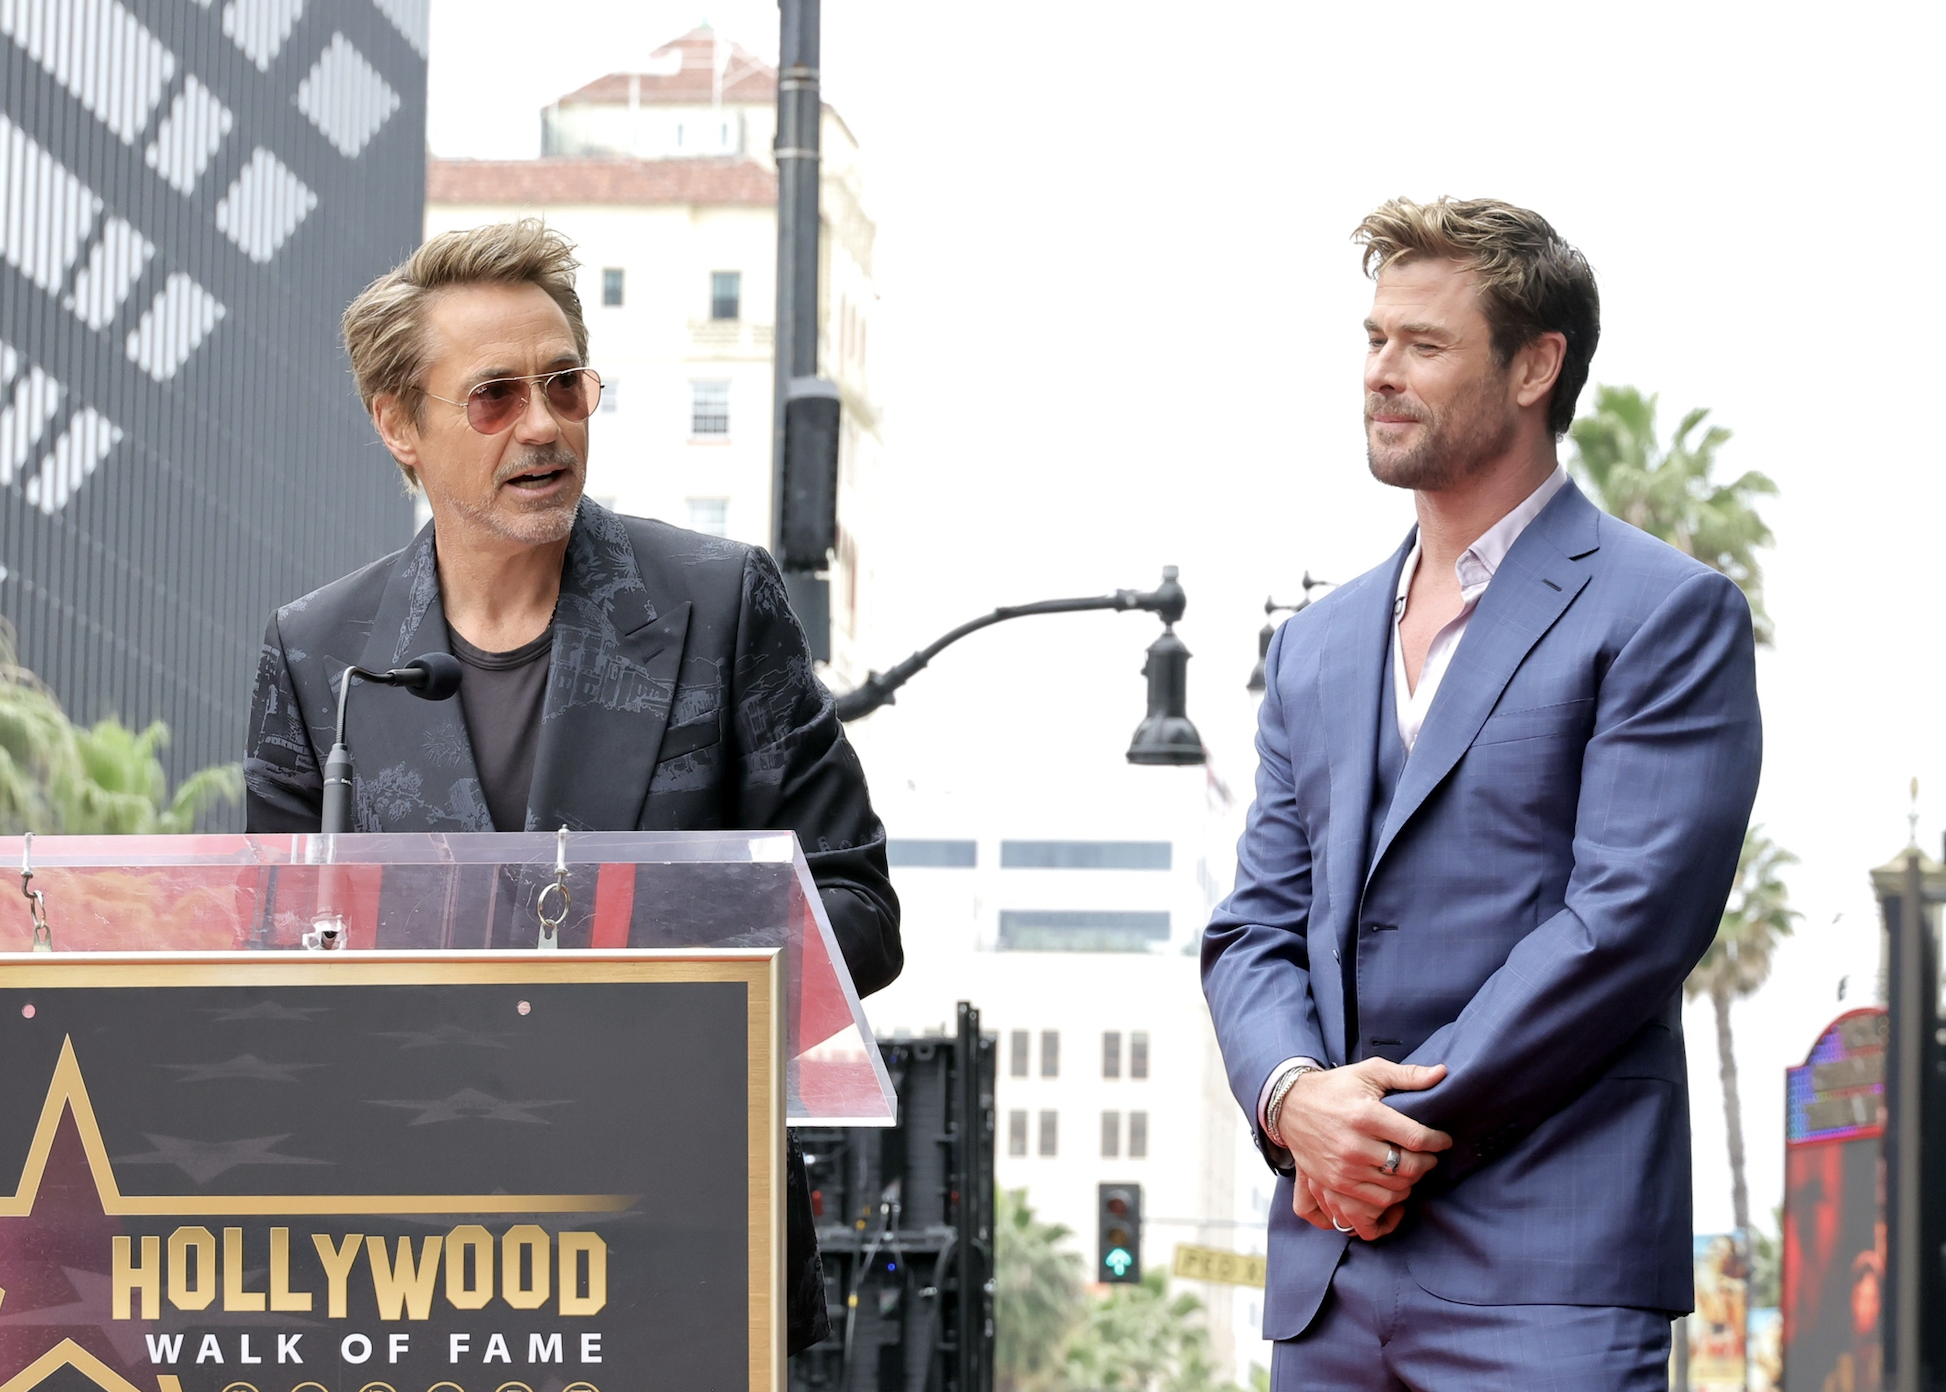 Robert Downey Jr. Roasts Chris Hemsworth by Asking ‘Avengers’ Cast to Describe ‘Thor’ Star in Three Words; Chris Evans...